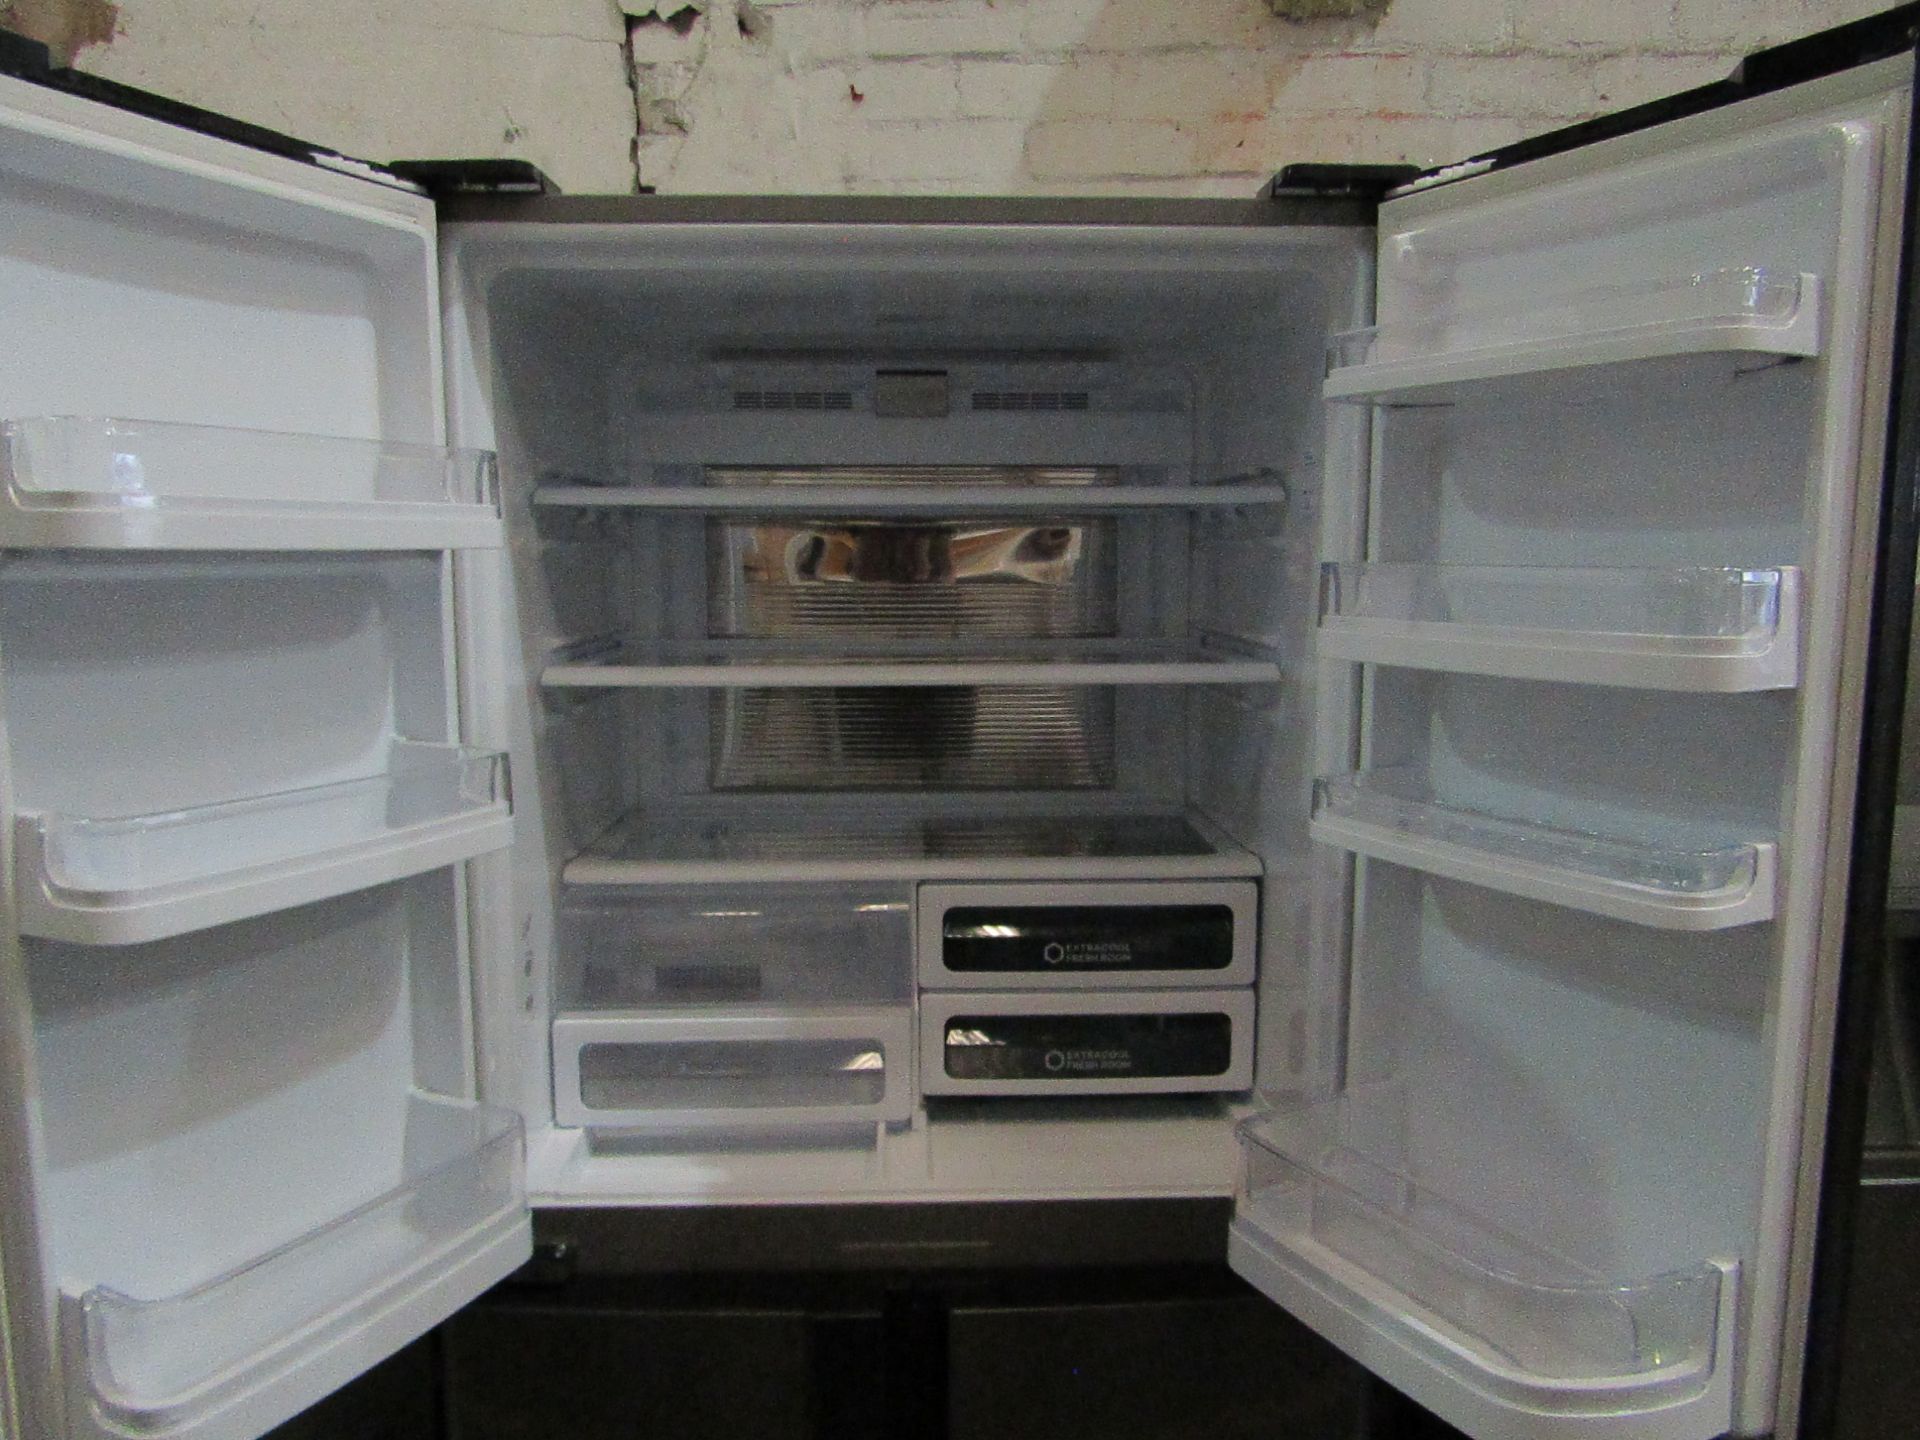 Sharp 4 door american fridge freezer, getting cold in both compartments when plugged in, has a - Image 3 of 4